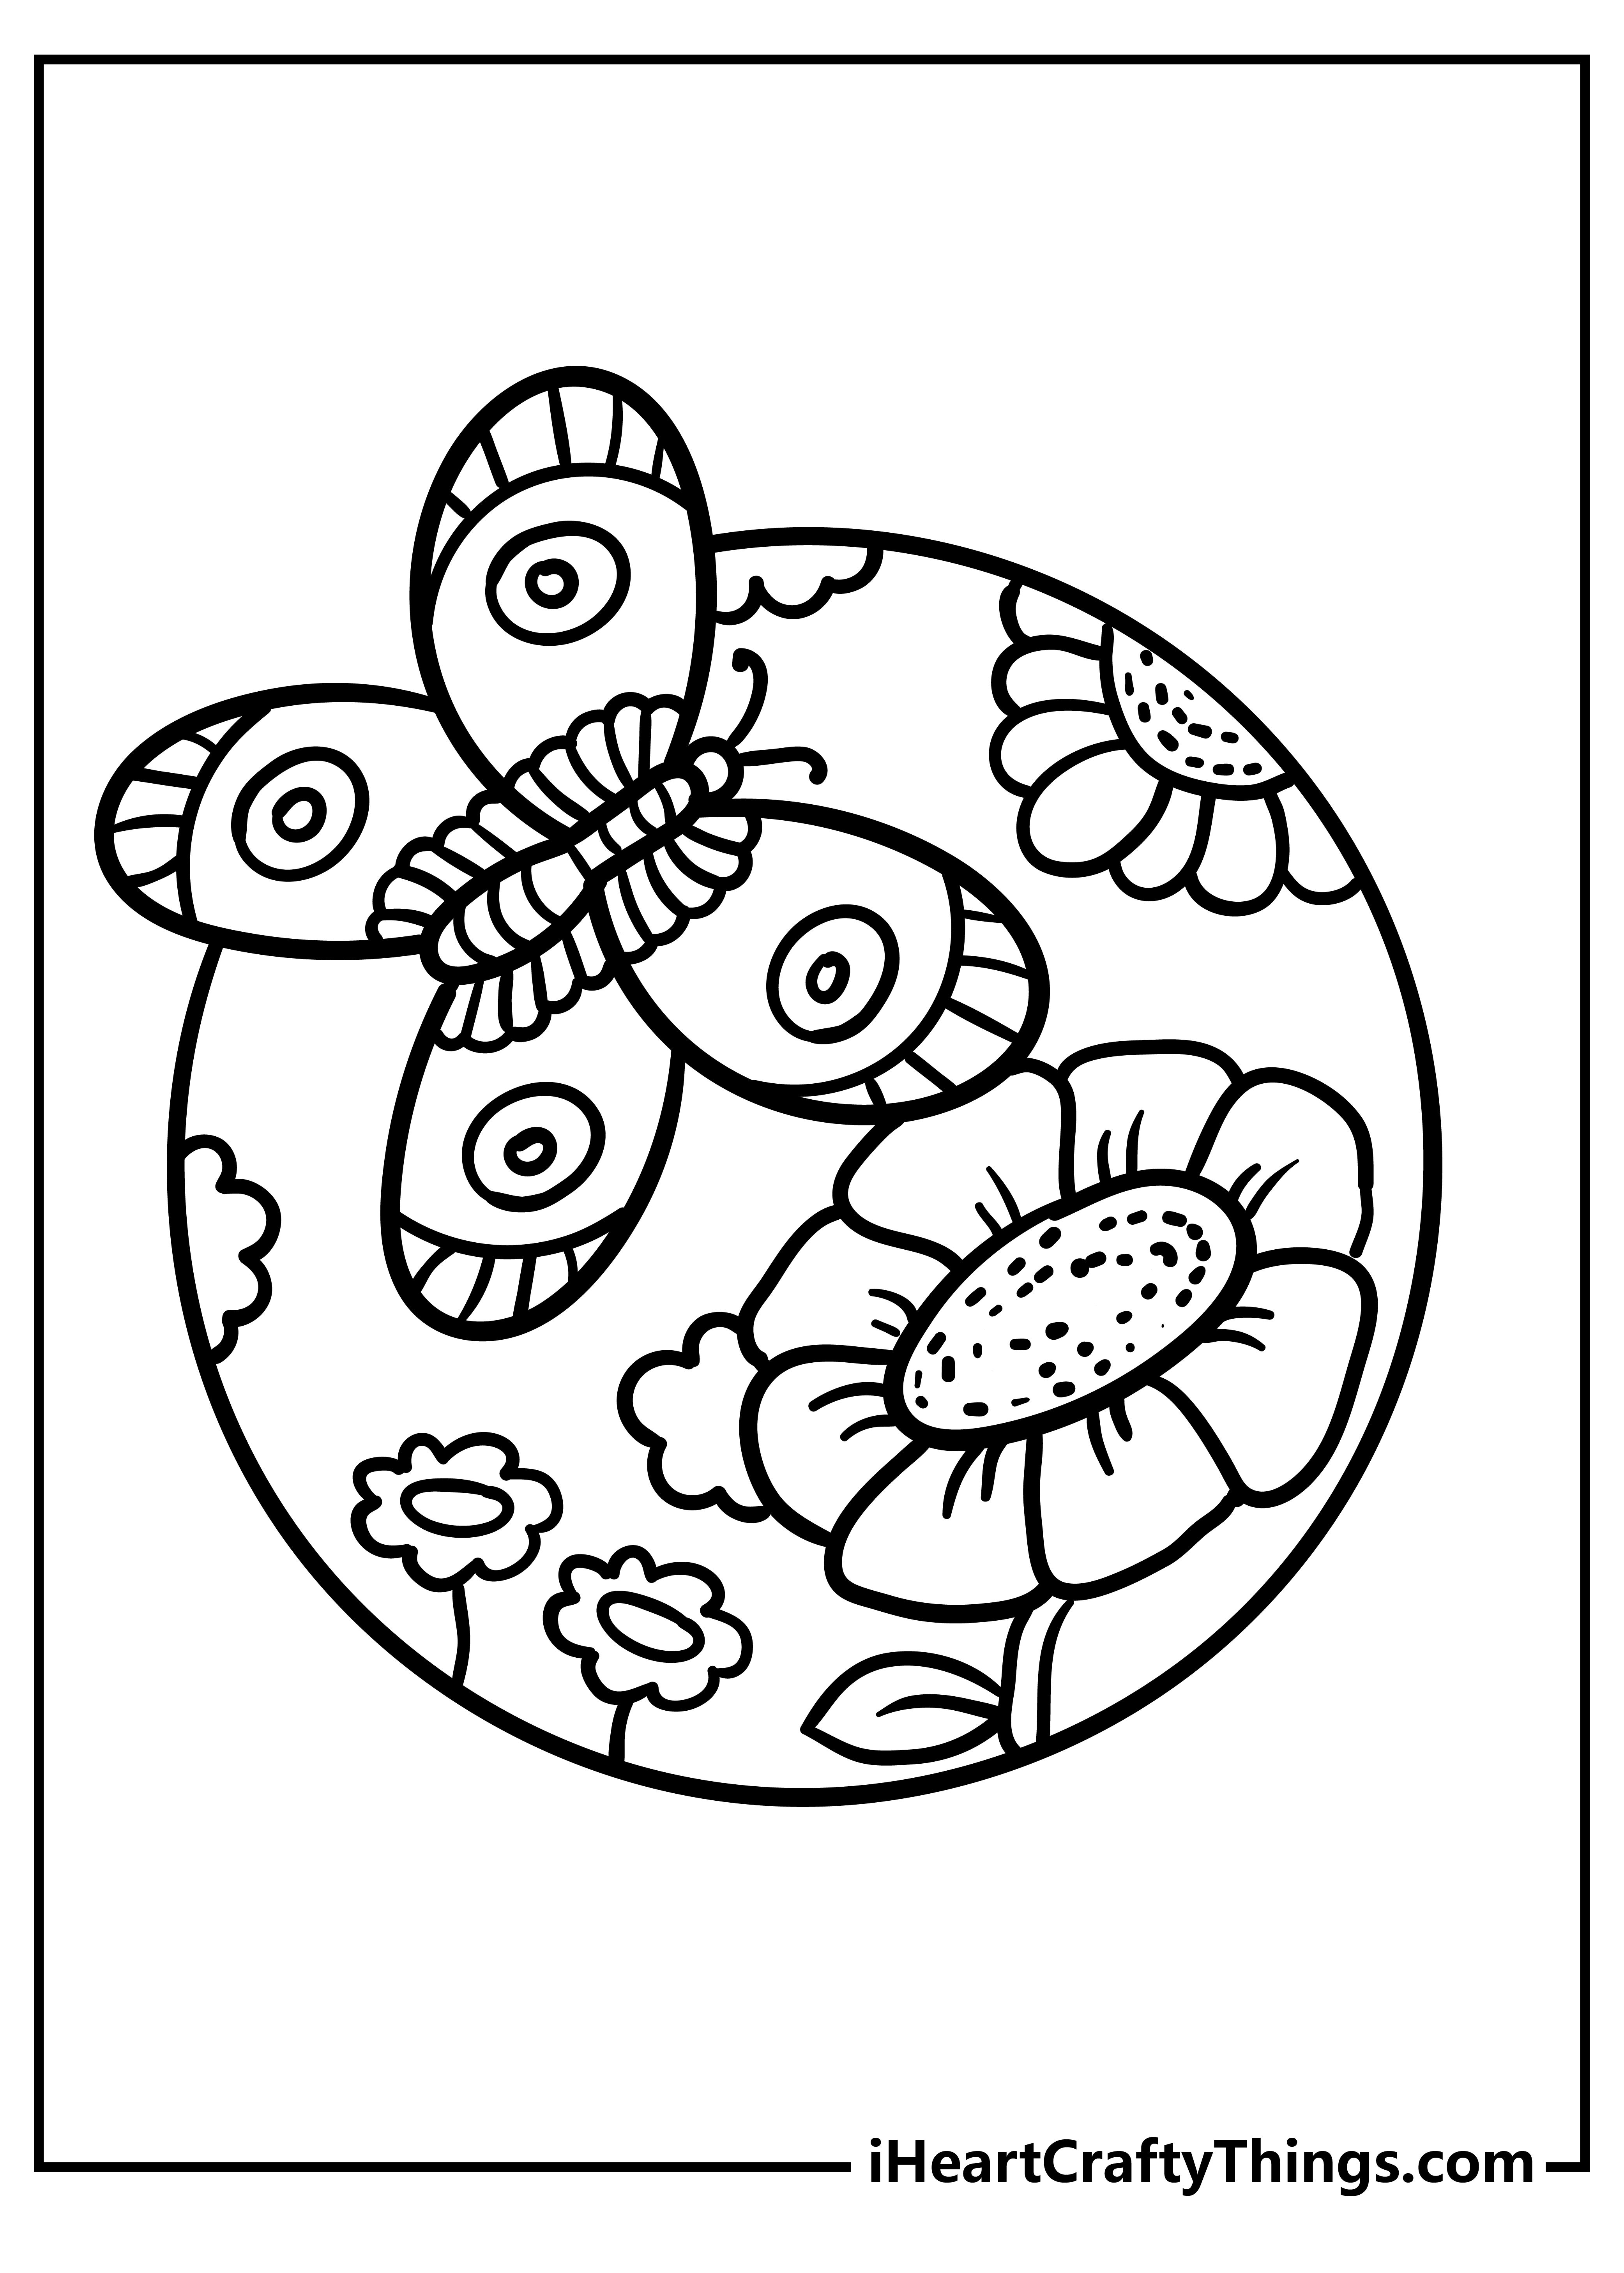 Printable Nature Coloring Pages Updated 21